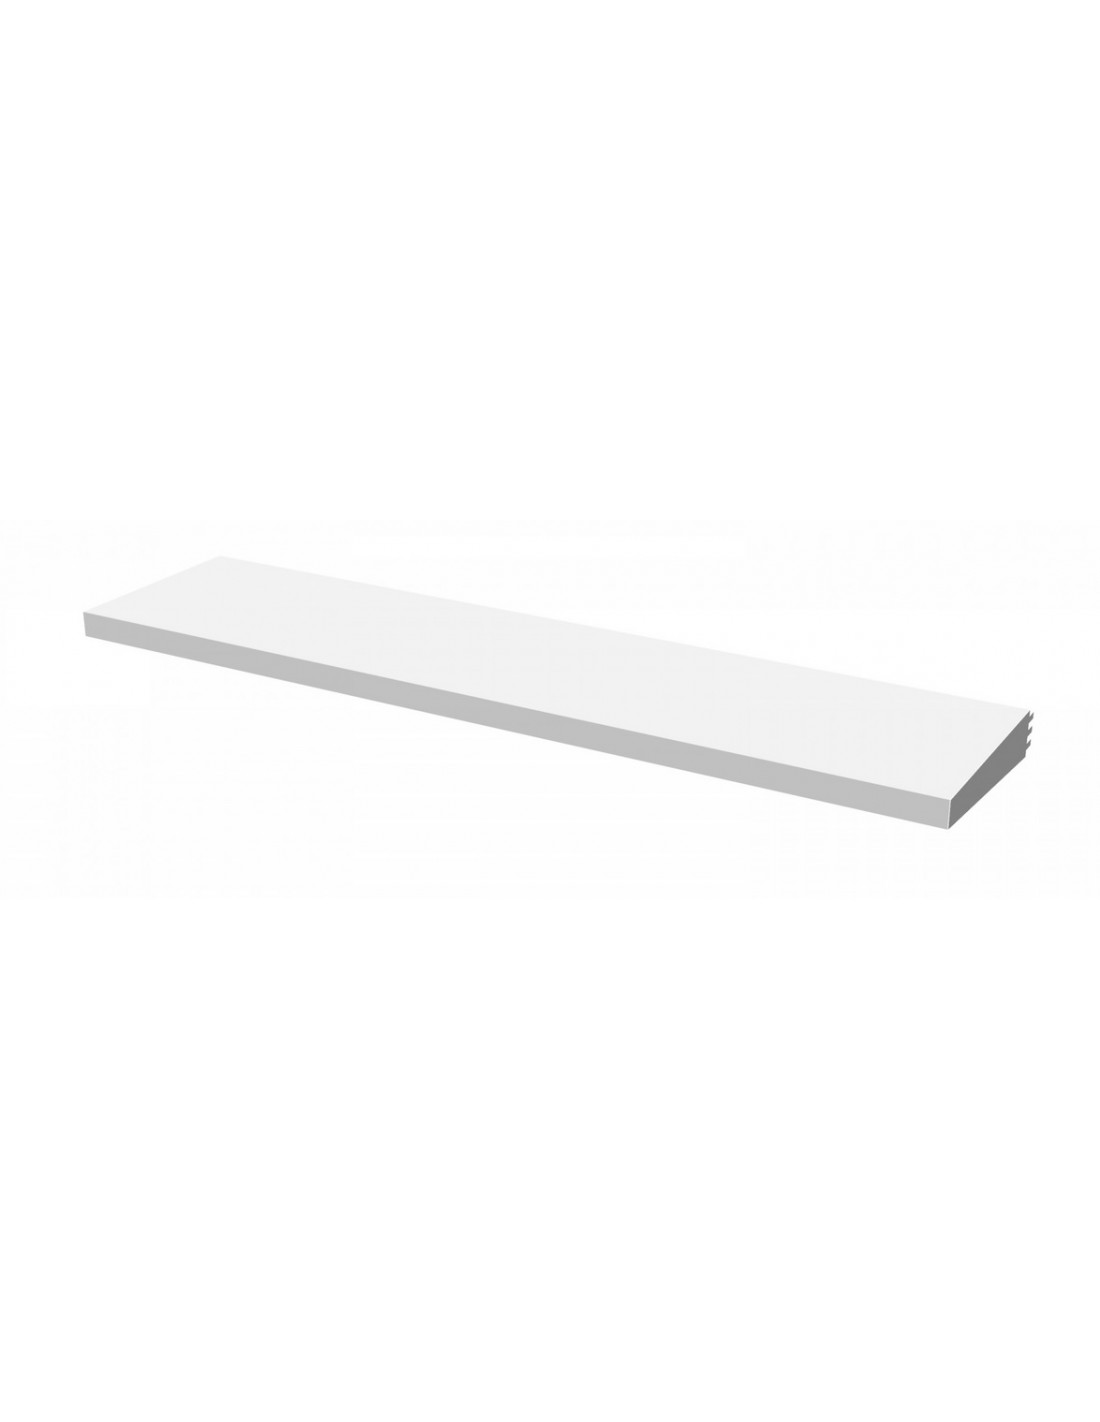 Additional shelf in 140 cm white painted sheet - For mod. VOLCANO 60